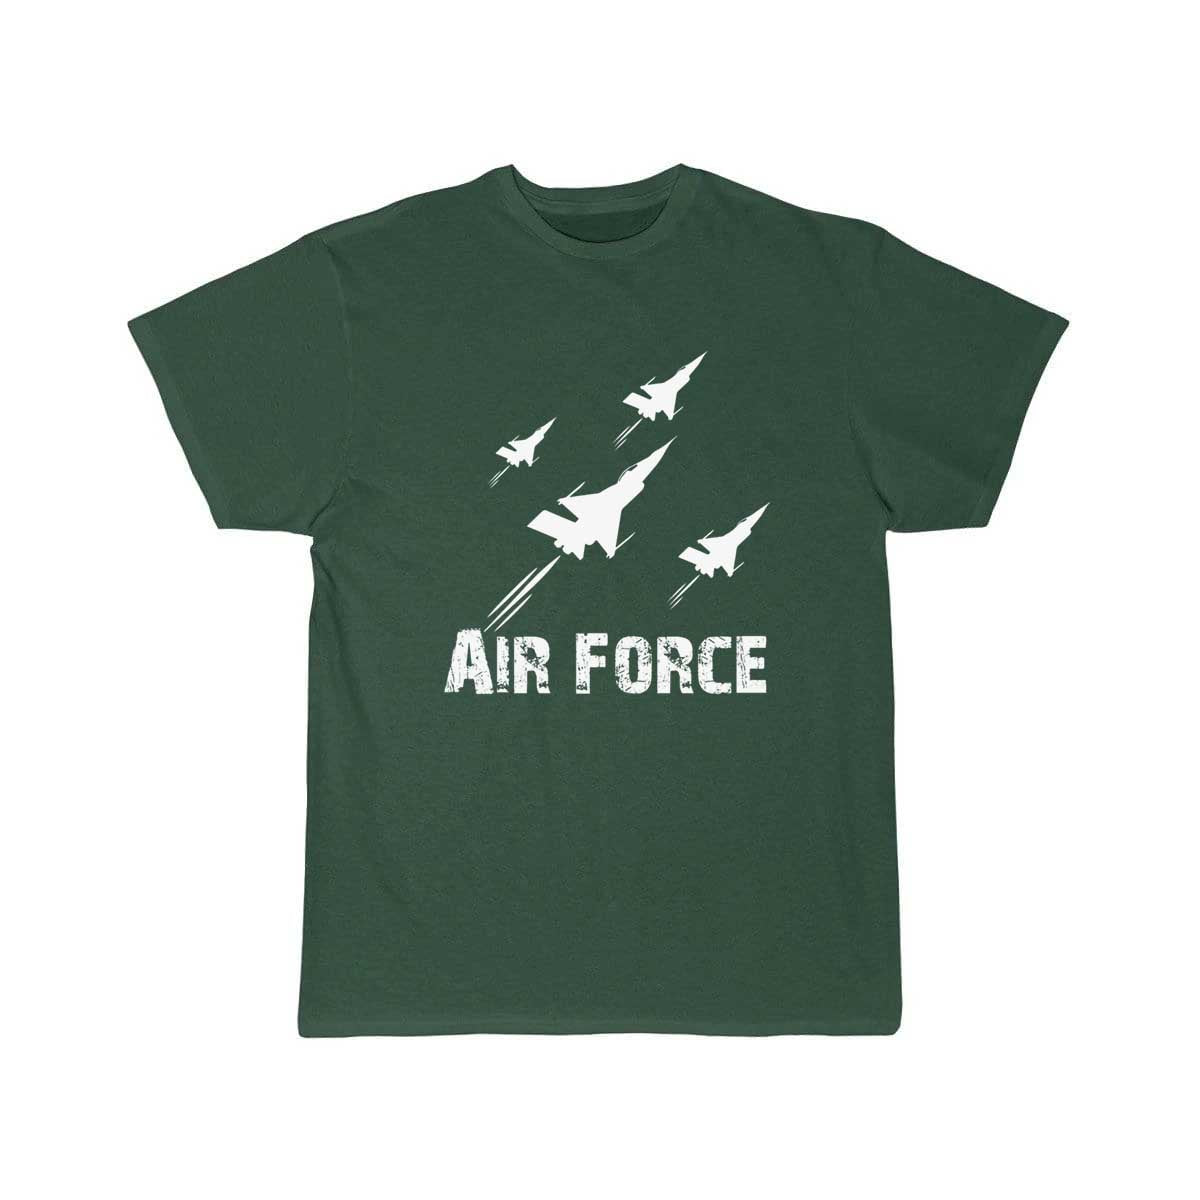 Fly fighter Airforce Jets Tees  T Shirt THE AV8R